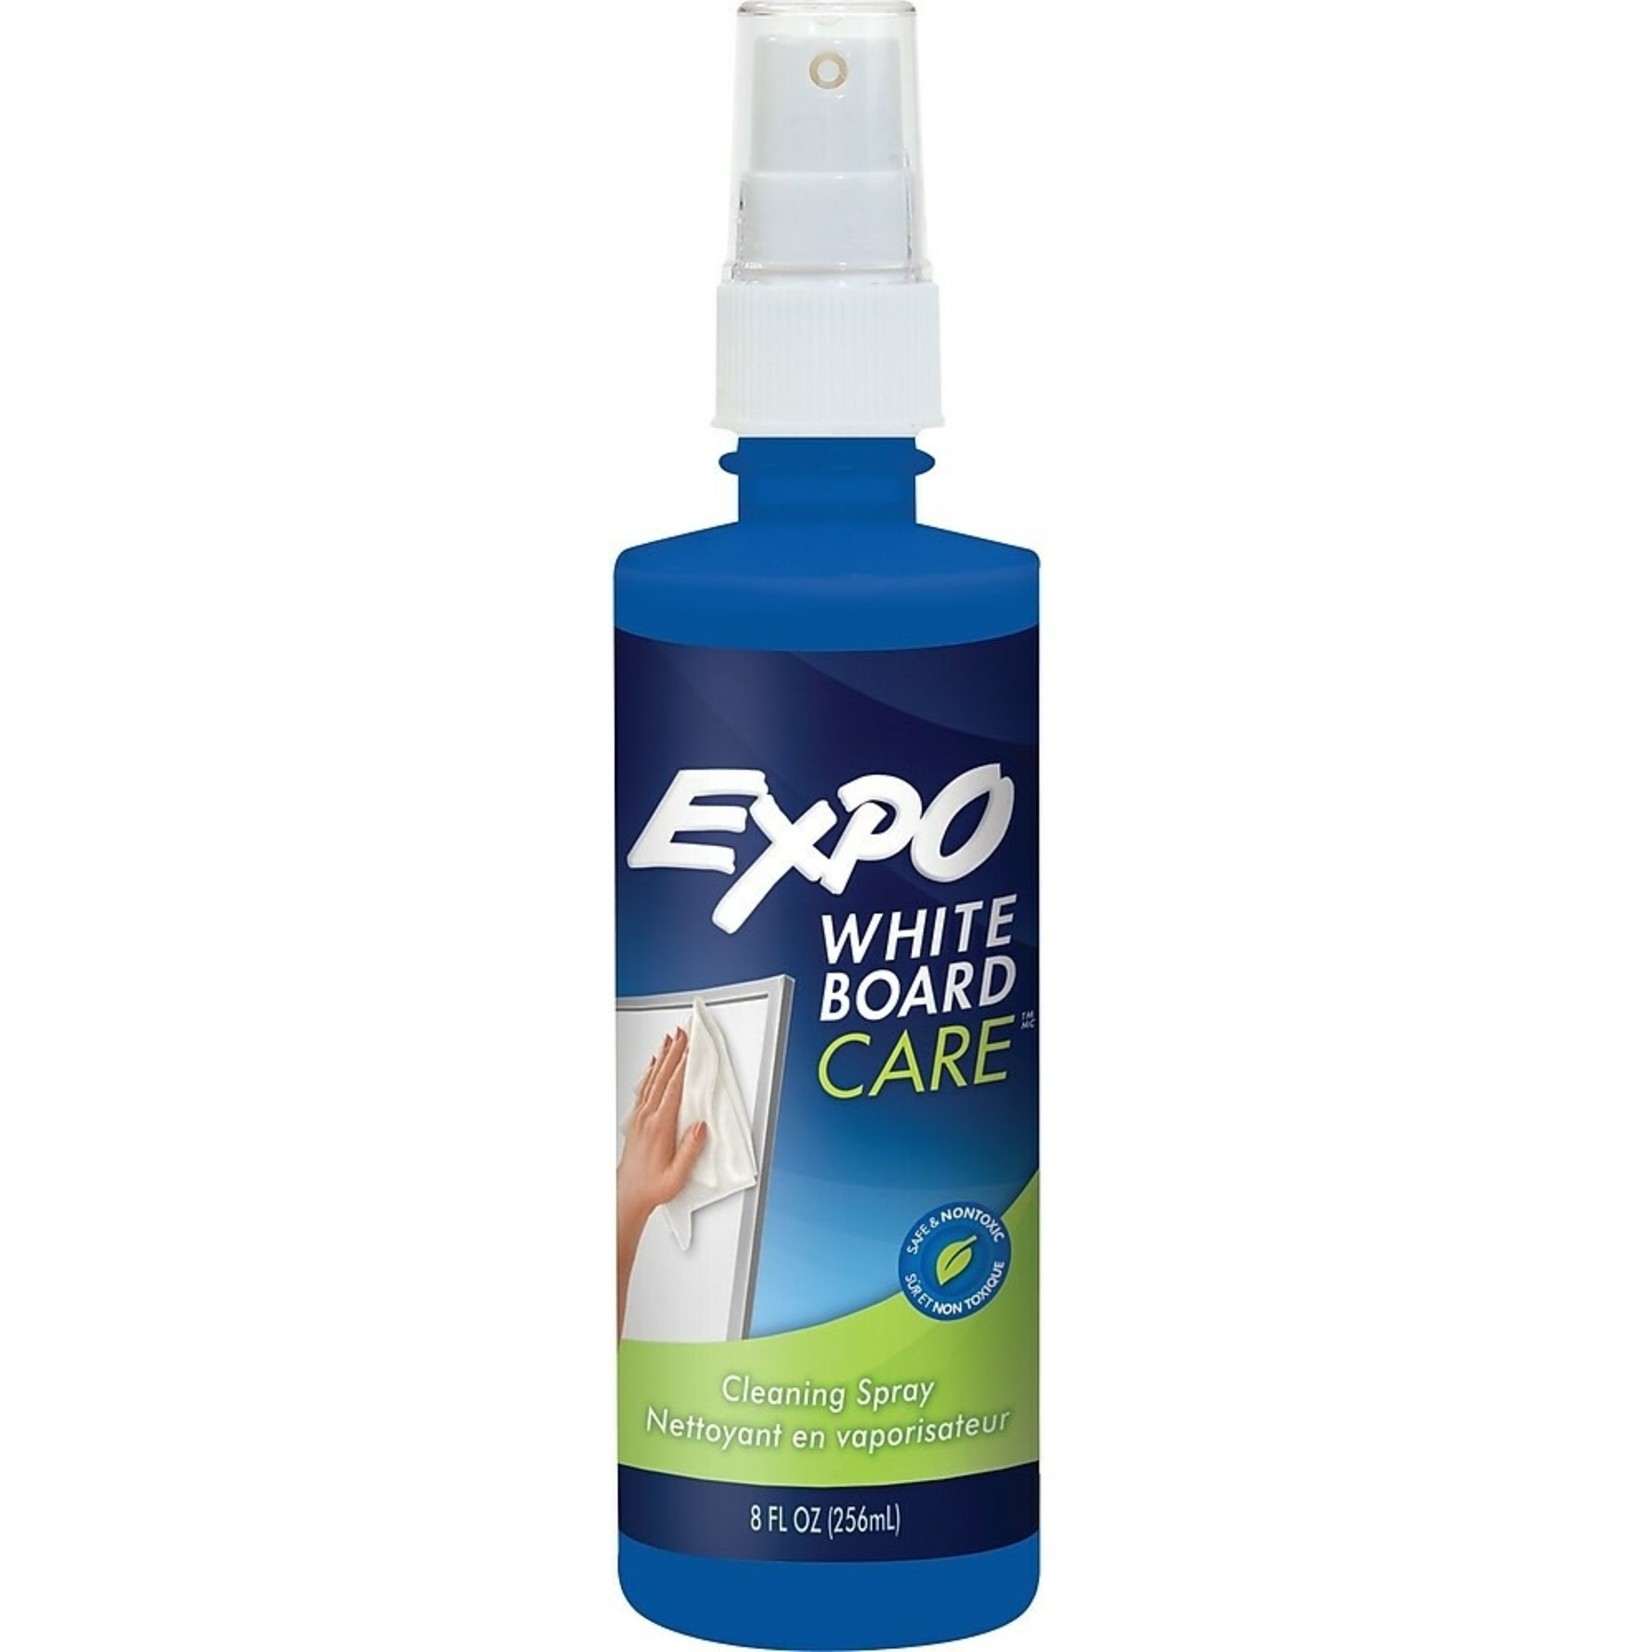 Expo Non-Toxic Whiteboard Care Cleaning Spray, 8oz